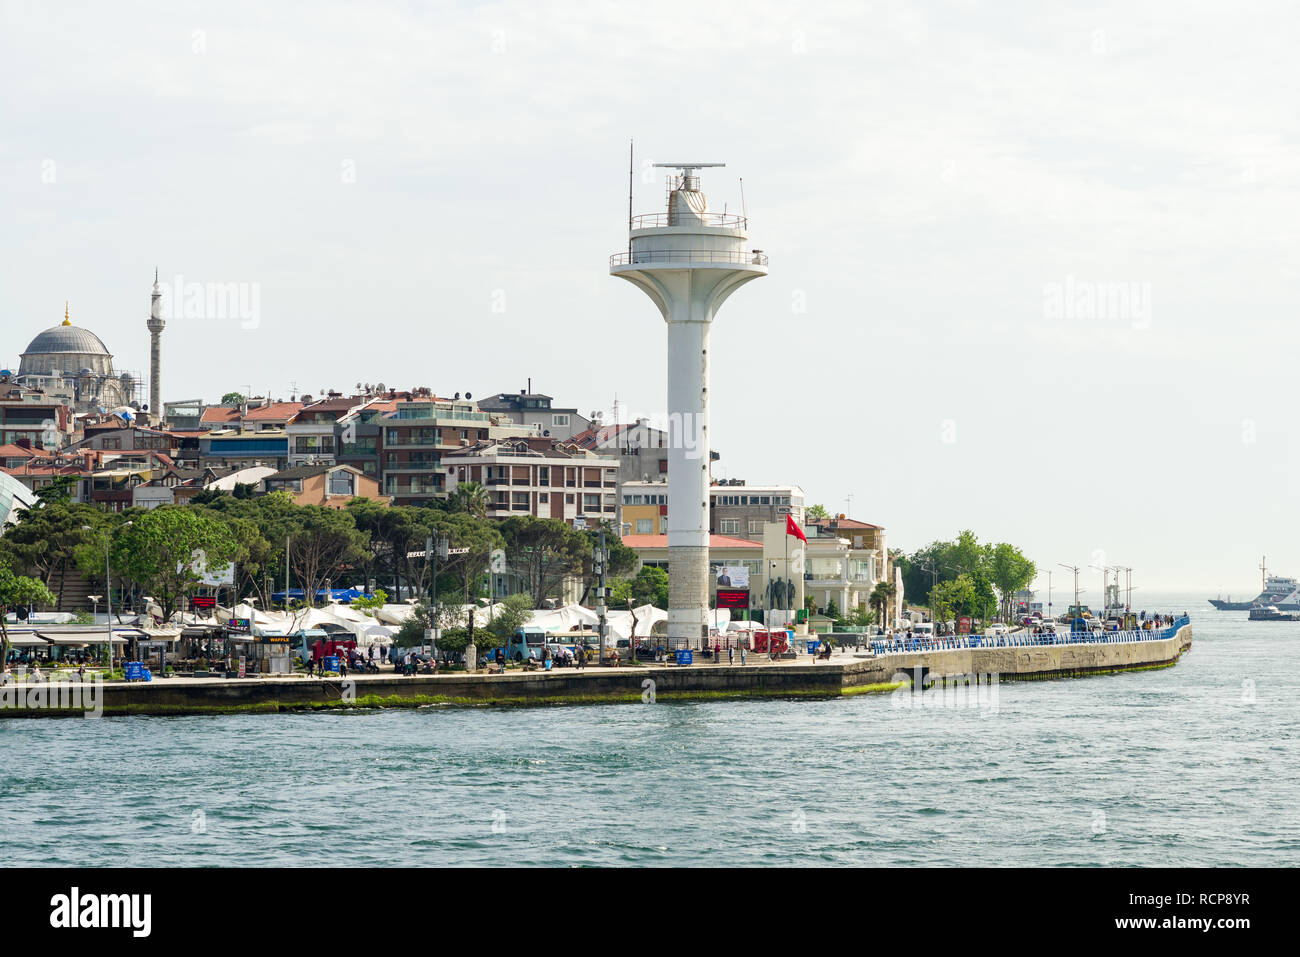 River traffic tower and buildings in the Üsküdar area of Istanbul from the Bosphorus Strait on a sunny day, Istanbul, Turkey Stock Photo